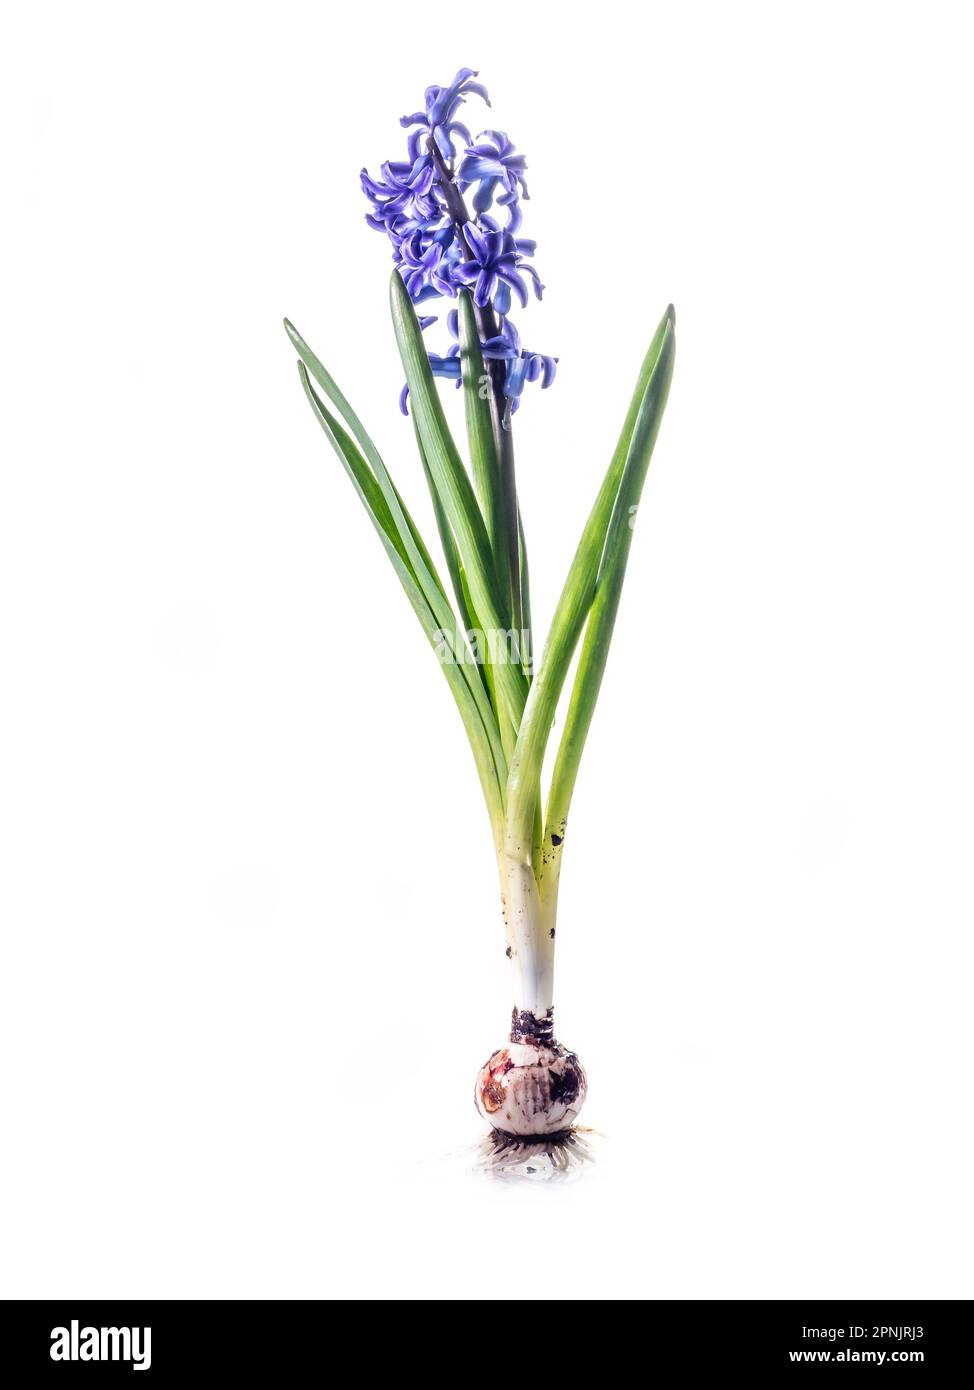 Studio shot of violet hyacinth in blossom with bulb on white background Stock Photo